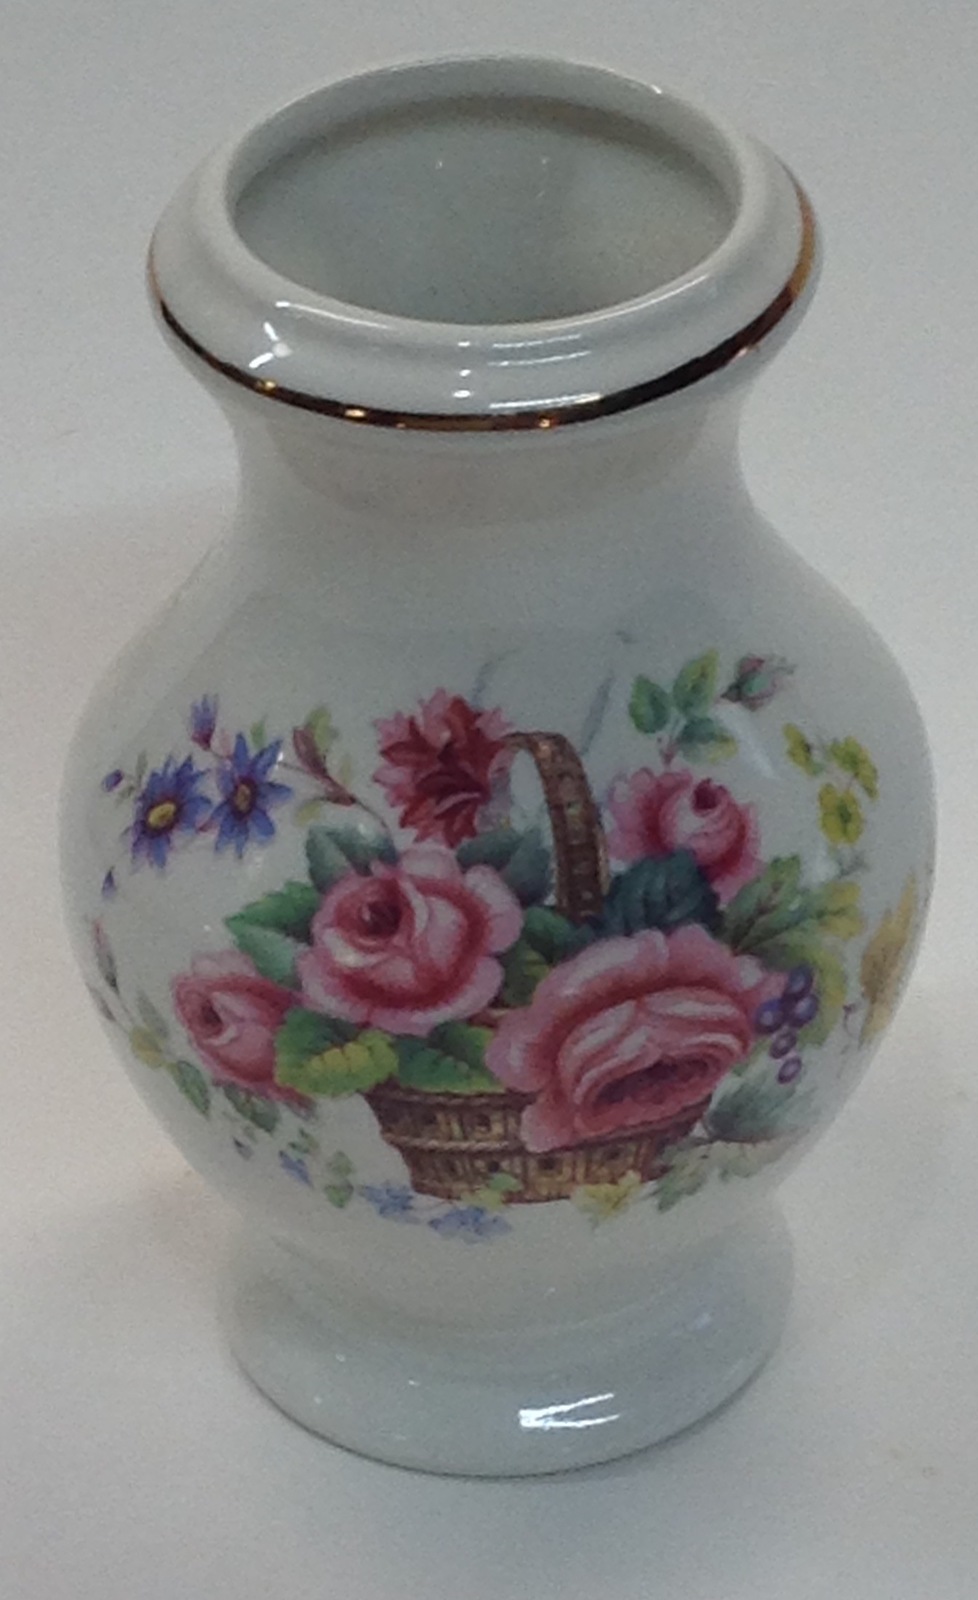 Primary image for Wood and Sons England Flowred Vase Vintage Genuine Ironstone